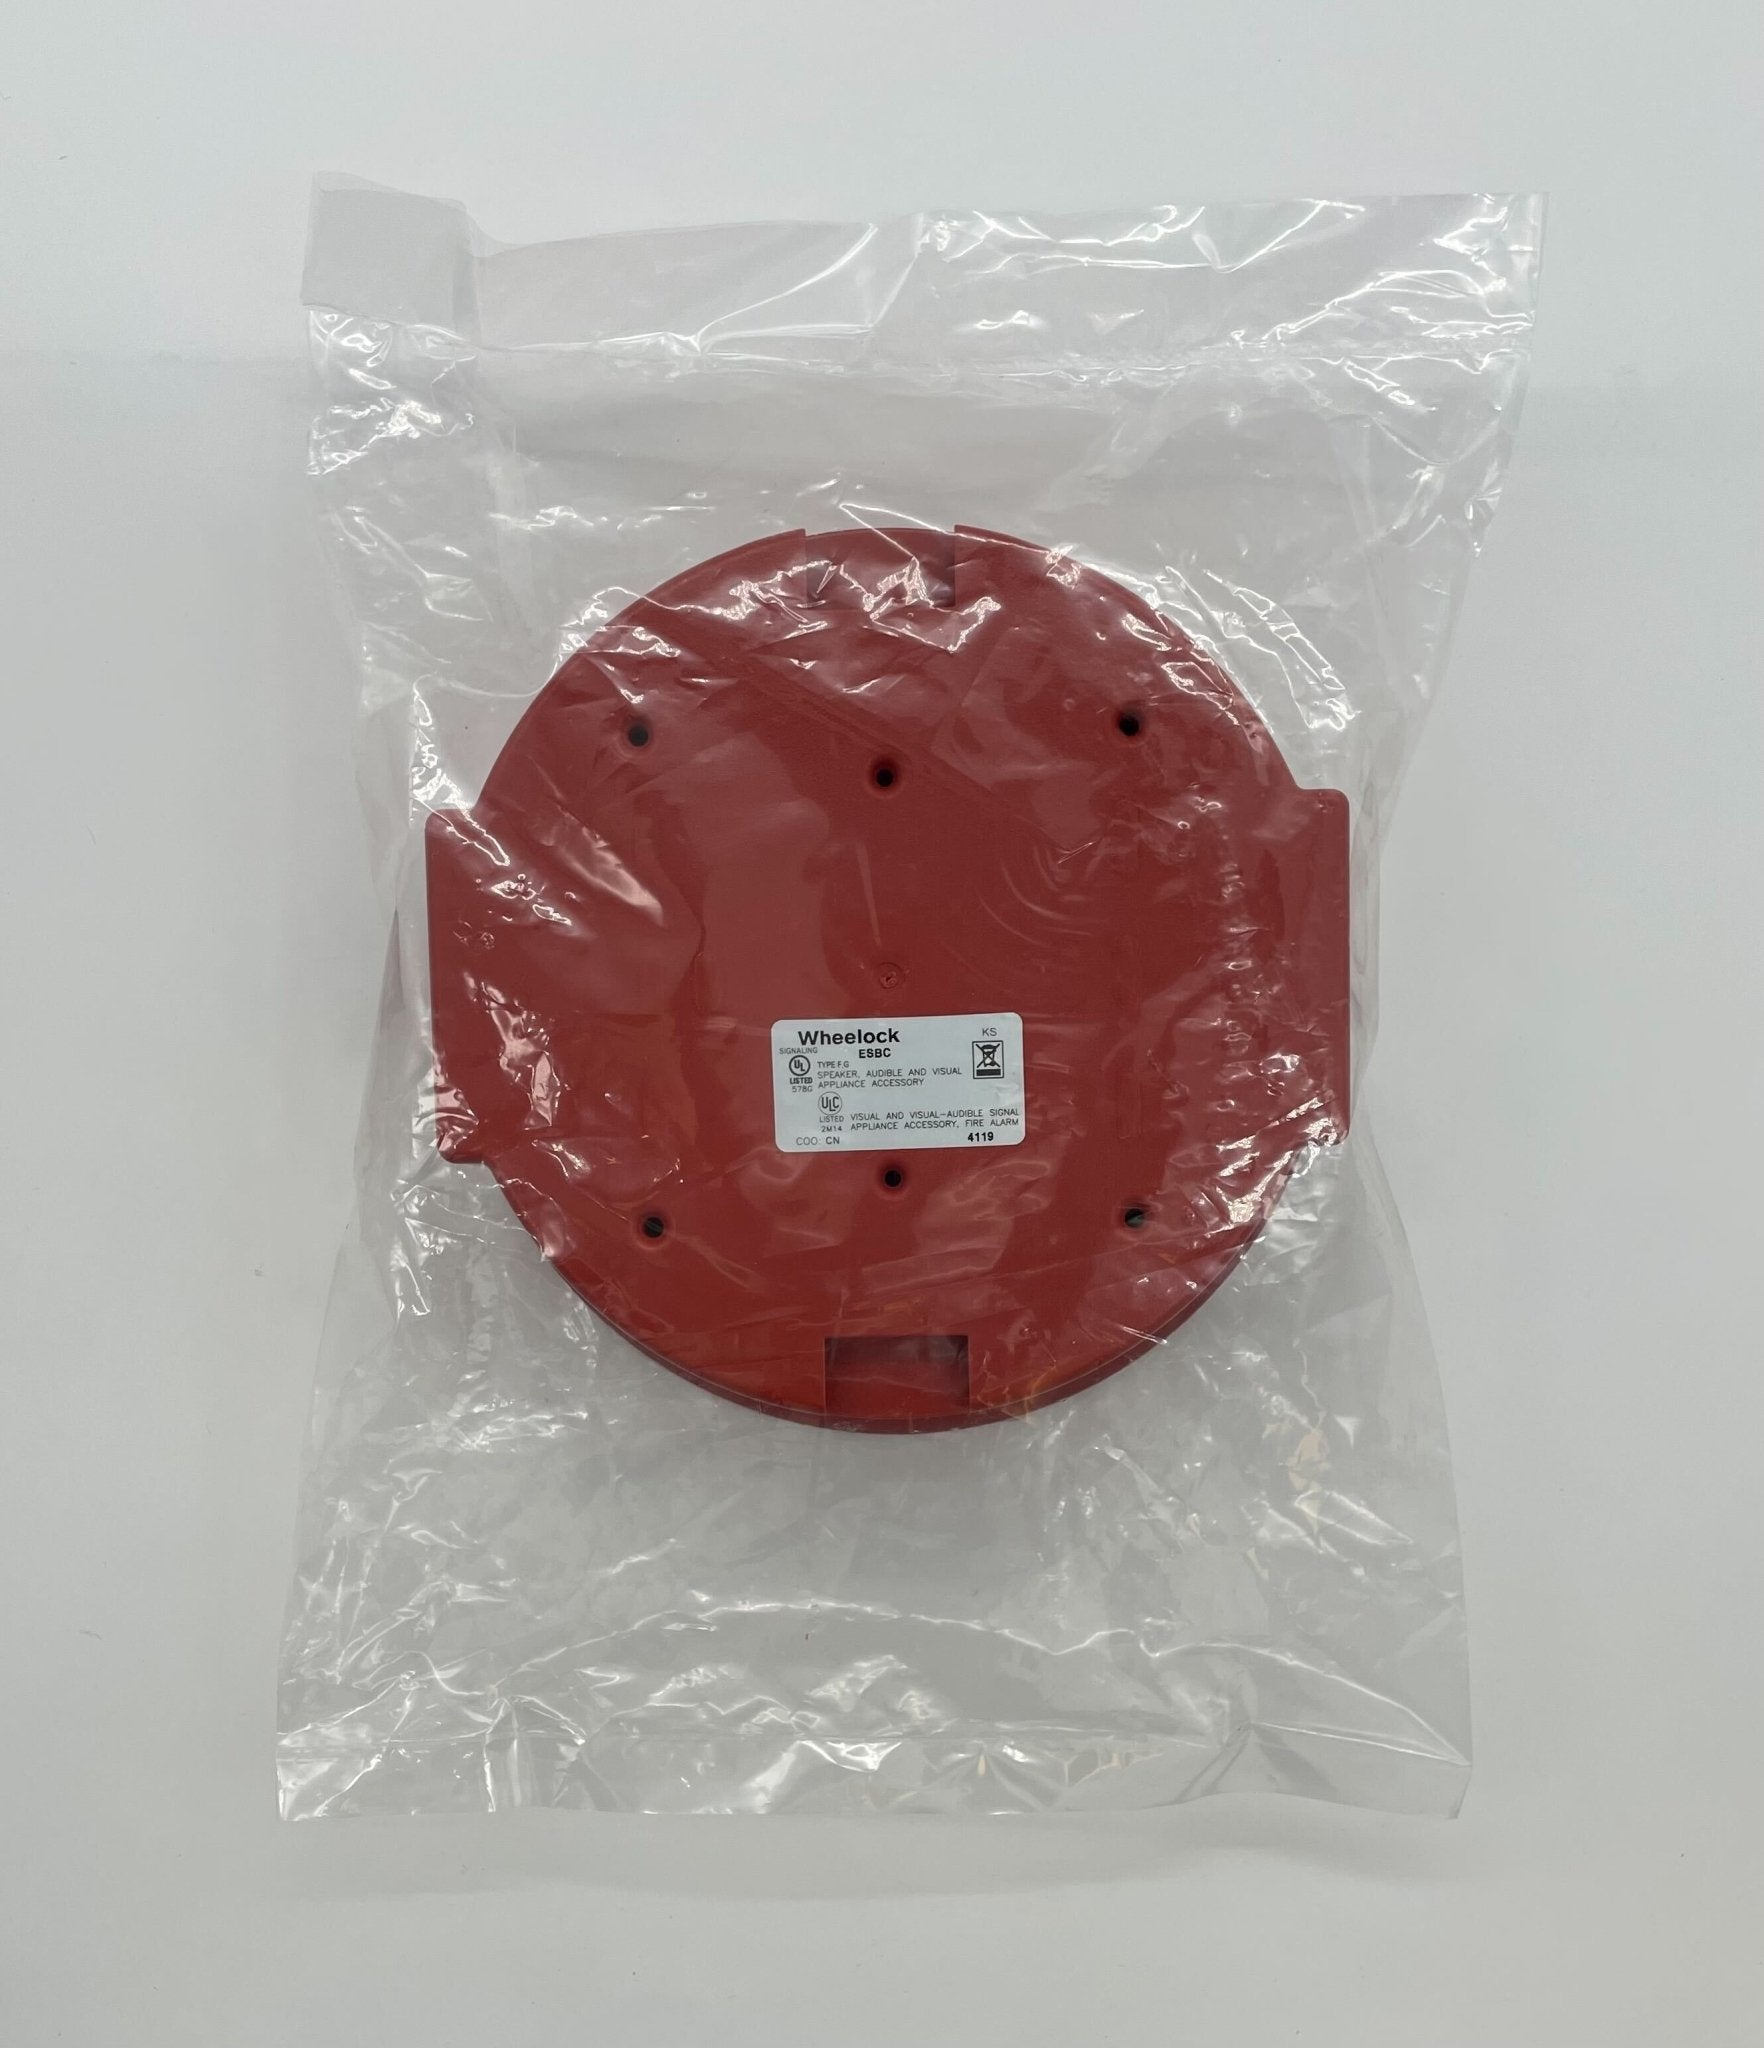 Wheelock Eaton ESBCR Exceder Series Ceiling Mount Back Box, Red - The Fire Alarm Supplier